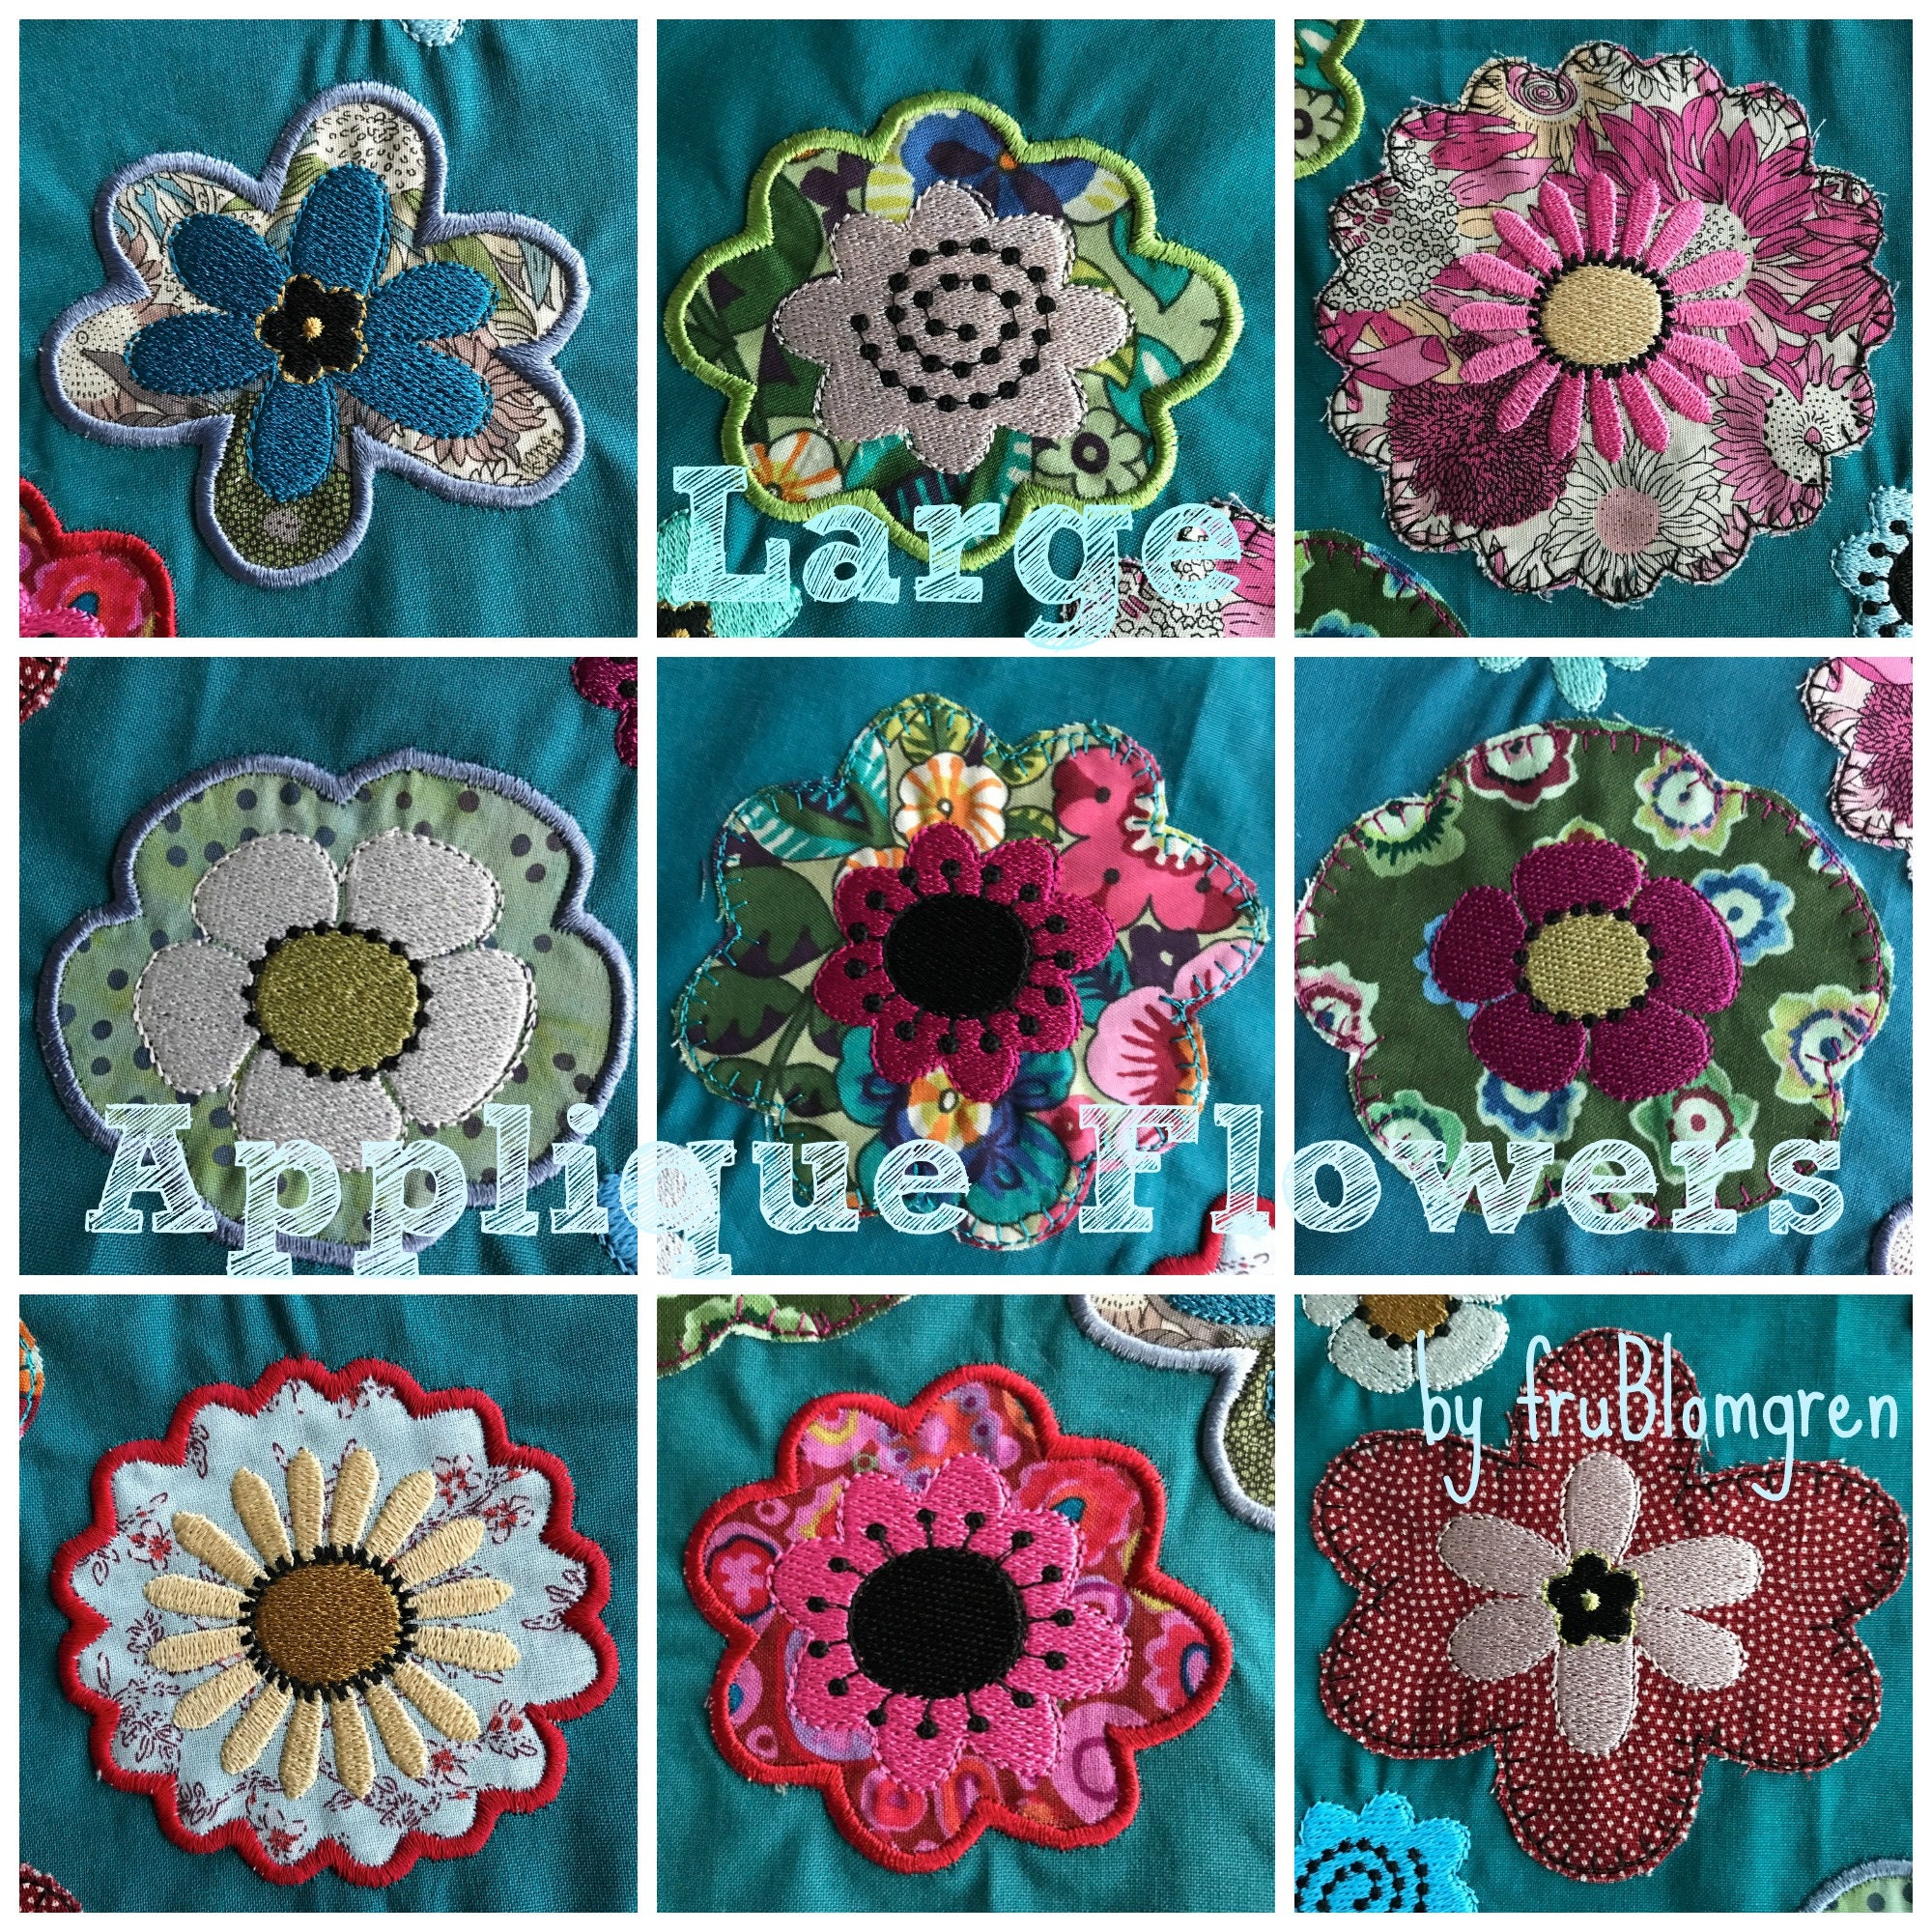 Whimsical Flower Applique Design for Clothing or Home Decor in 3